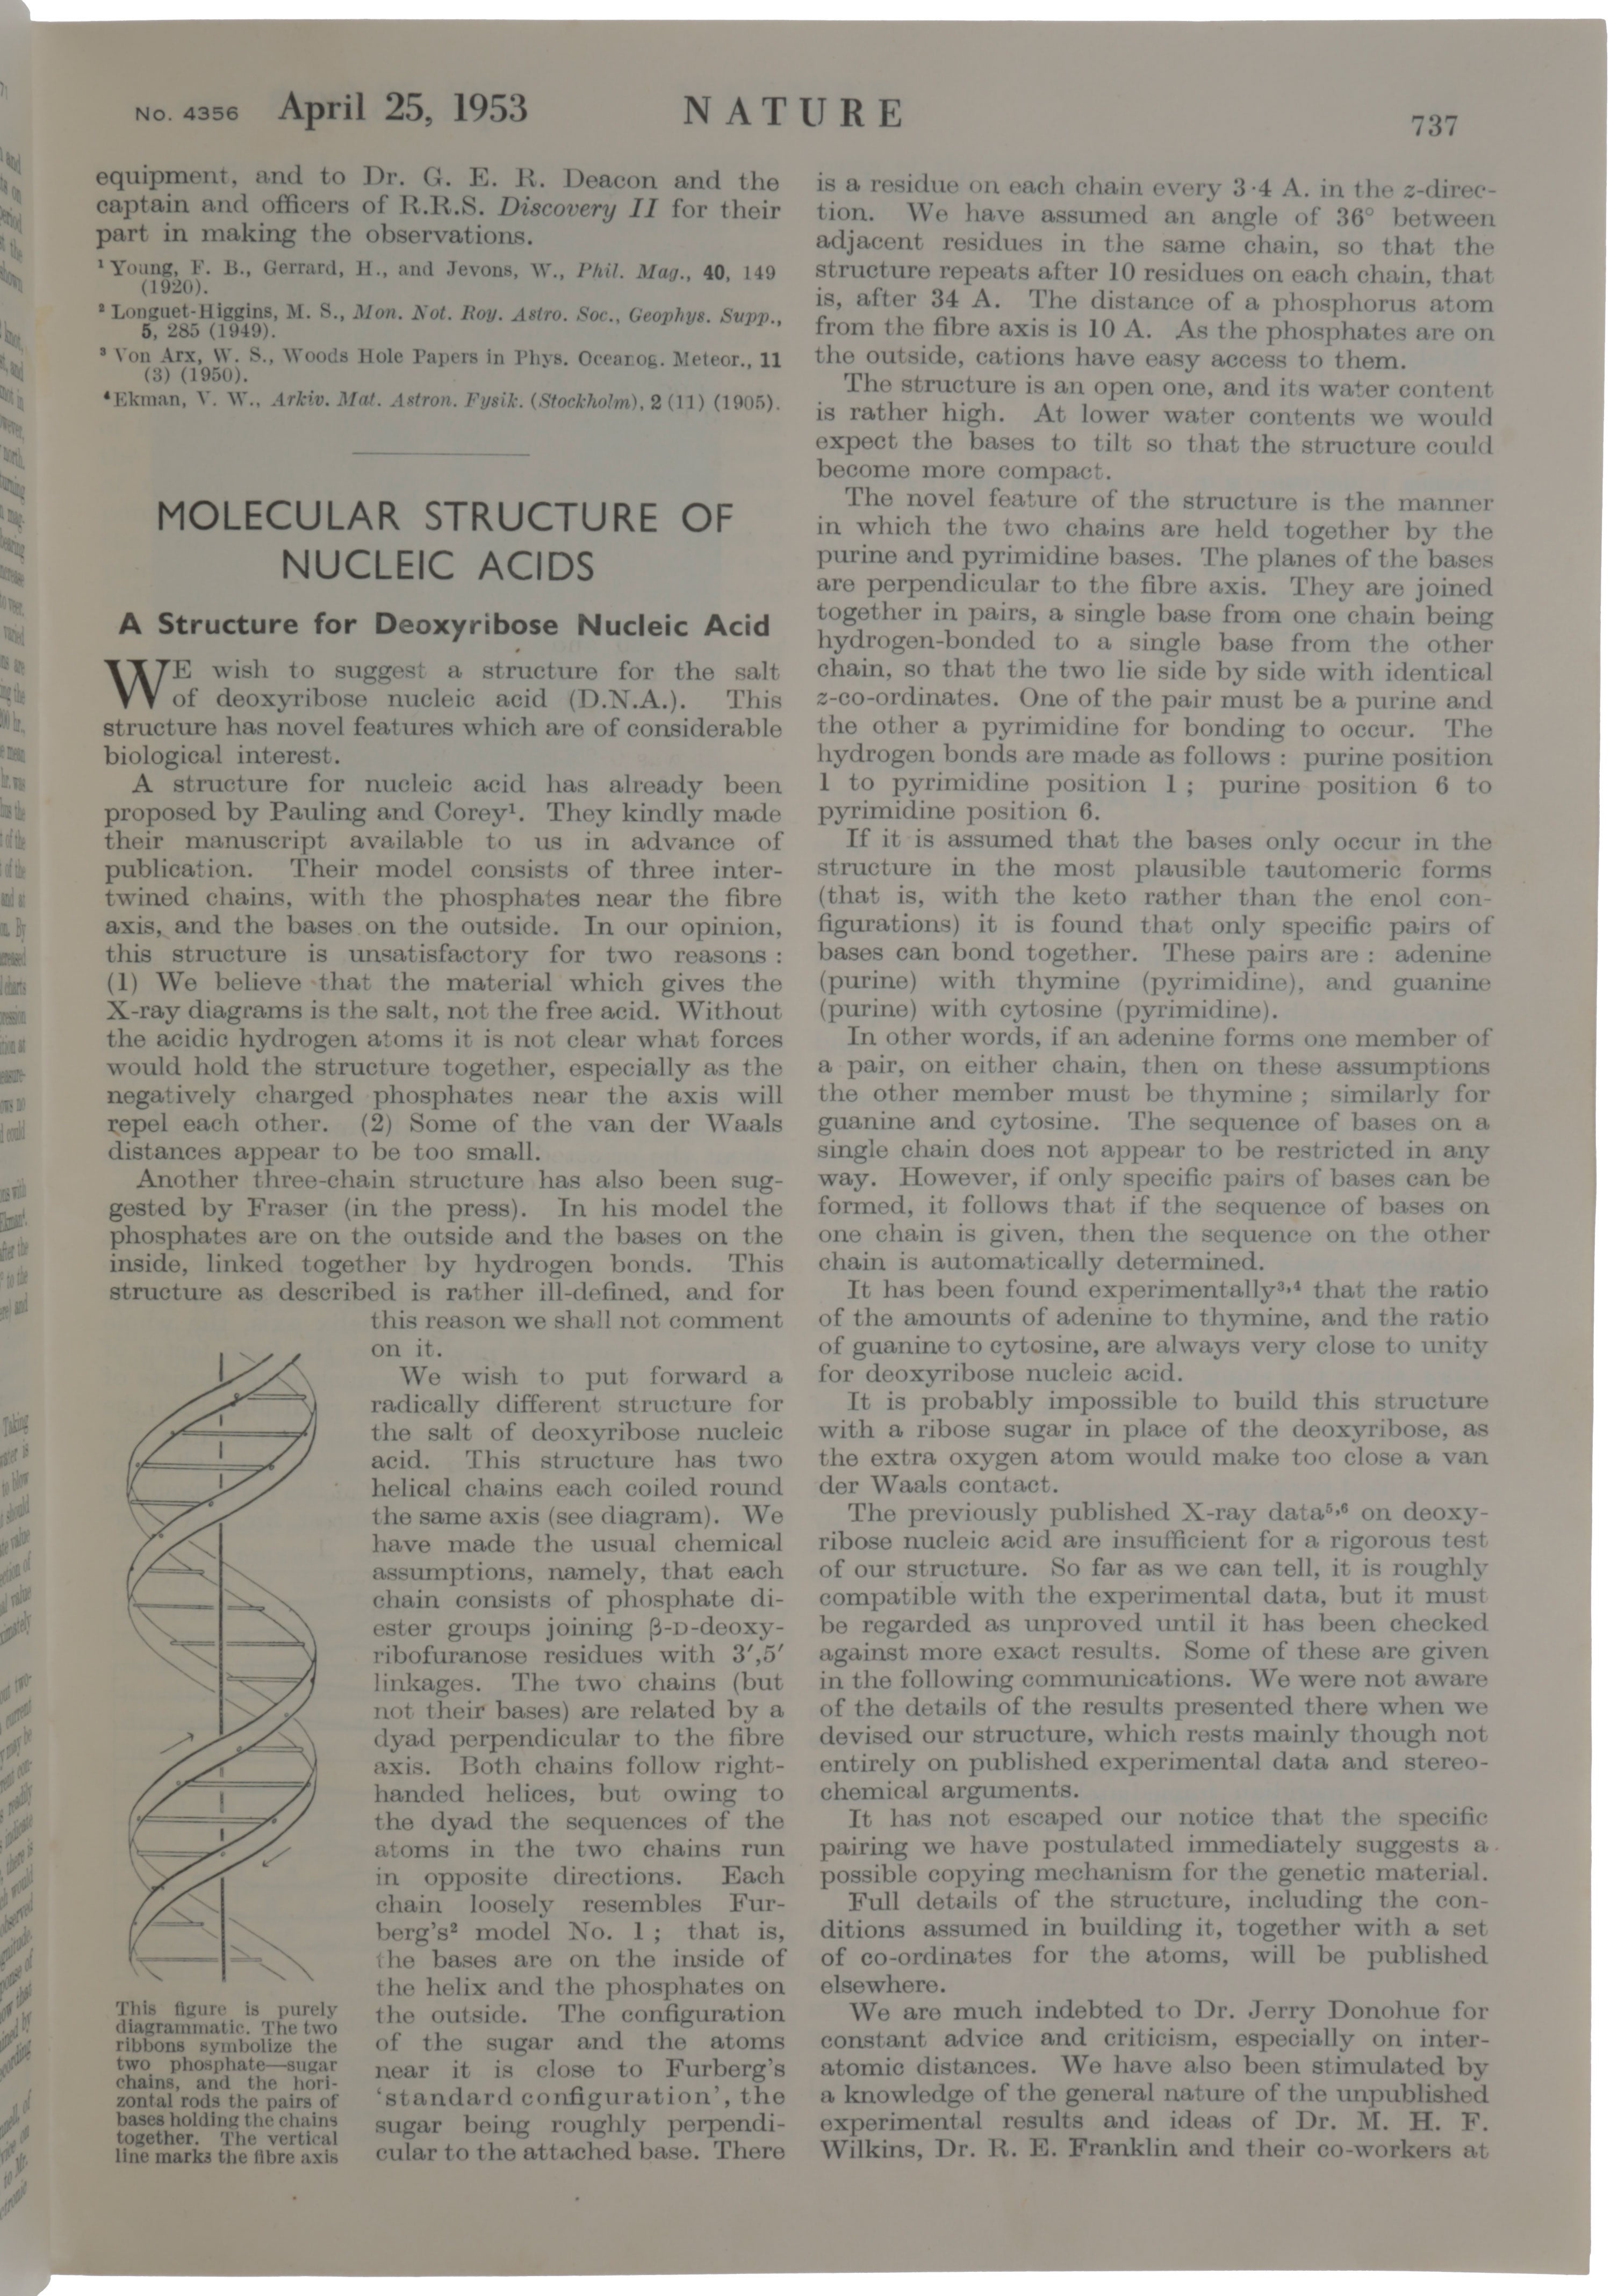 Item #5049 ‘Molecular Structure of Nucleic Acids: A Structure for Deoxyribose Nucleic Acid,’ pp. 737-738; WILKINS, M. H. F., STOKES, A. R. & WILSON, H. R. ‘Molecular Structure of Deoxypentose Nucleic Acids,’ pp. 738-740; FRANKLIN, R. E. & GOSLING, R. G. ‘Molecular Configuration in Sodium Thymonucleate,’ pp. 740-741. Three papers in: Nature, Vol. 171, No. 4356, April 25, 1953. J. D. WATSON, F. H. C. CRICK.